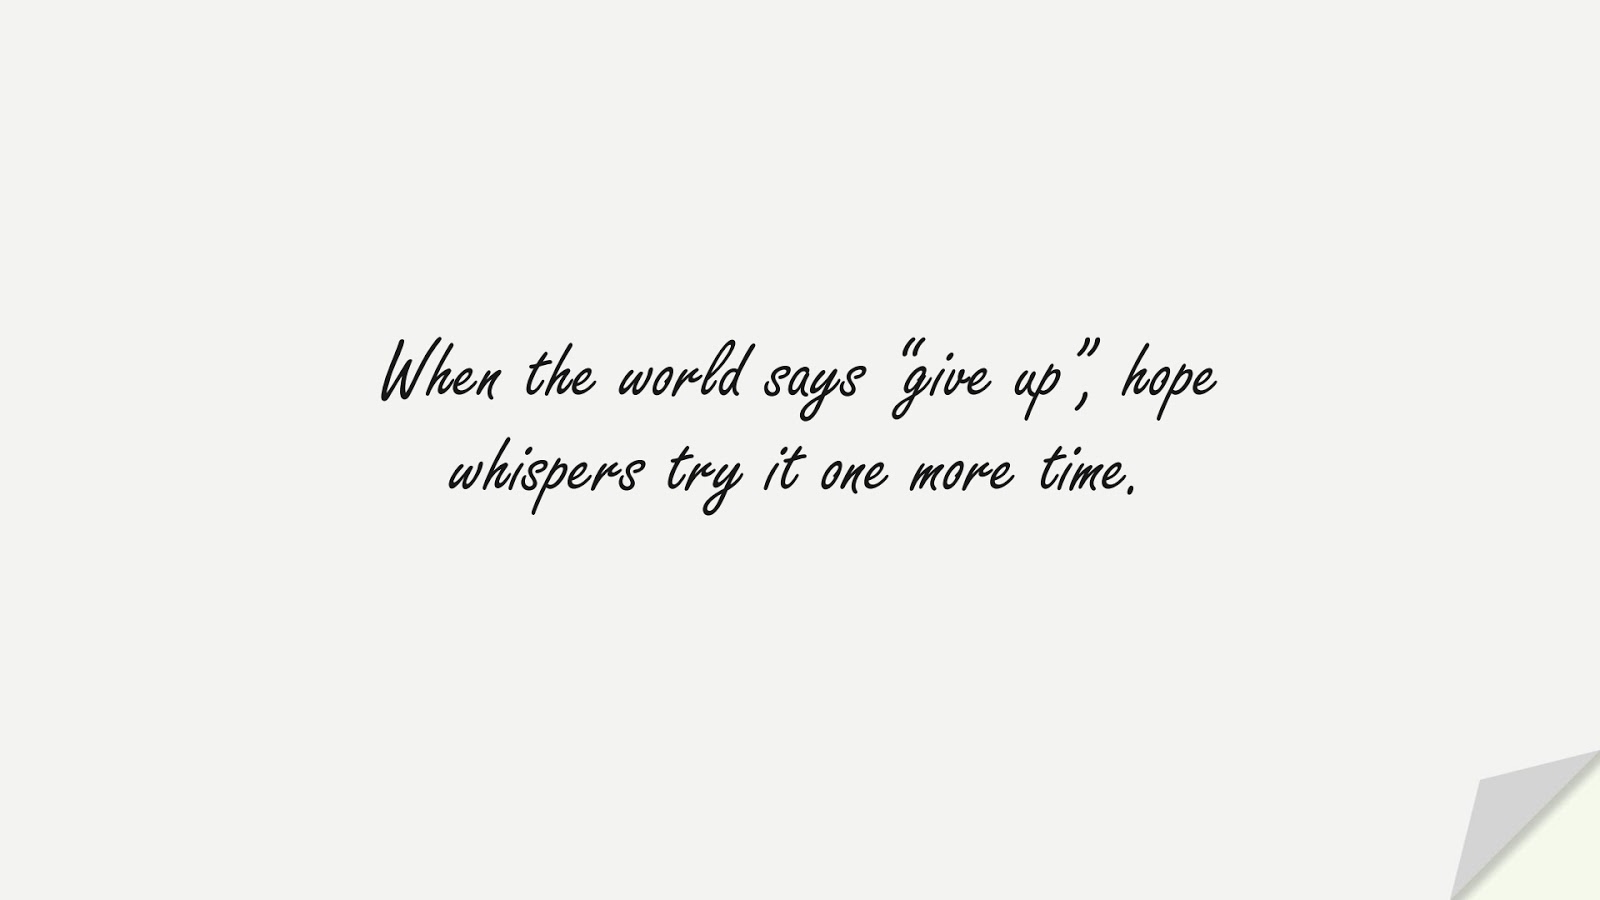 When the world says “give up”, hope whispers try it one more time.FALSE